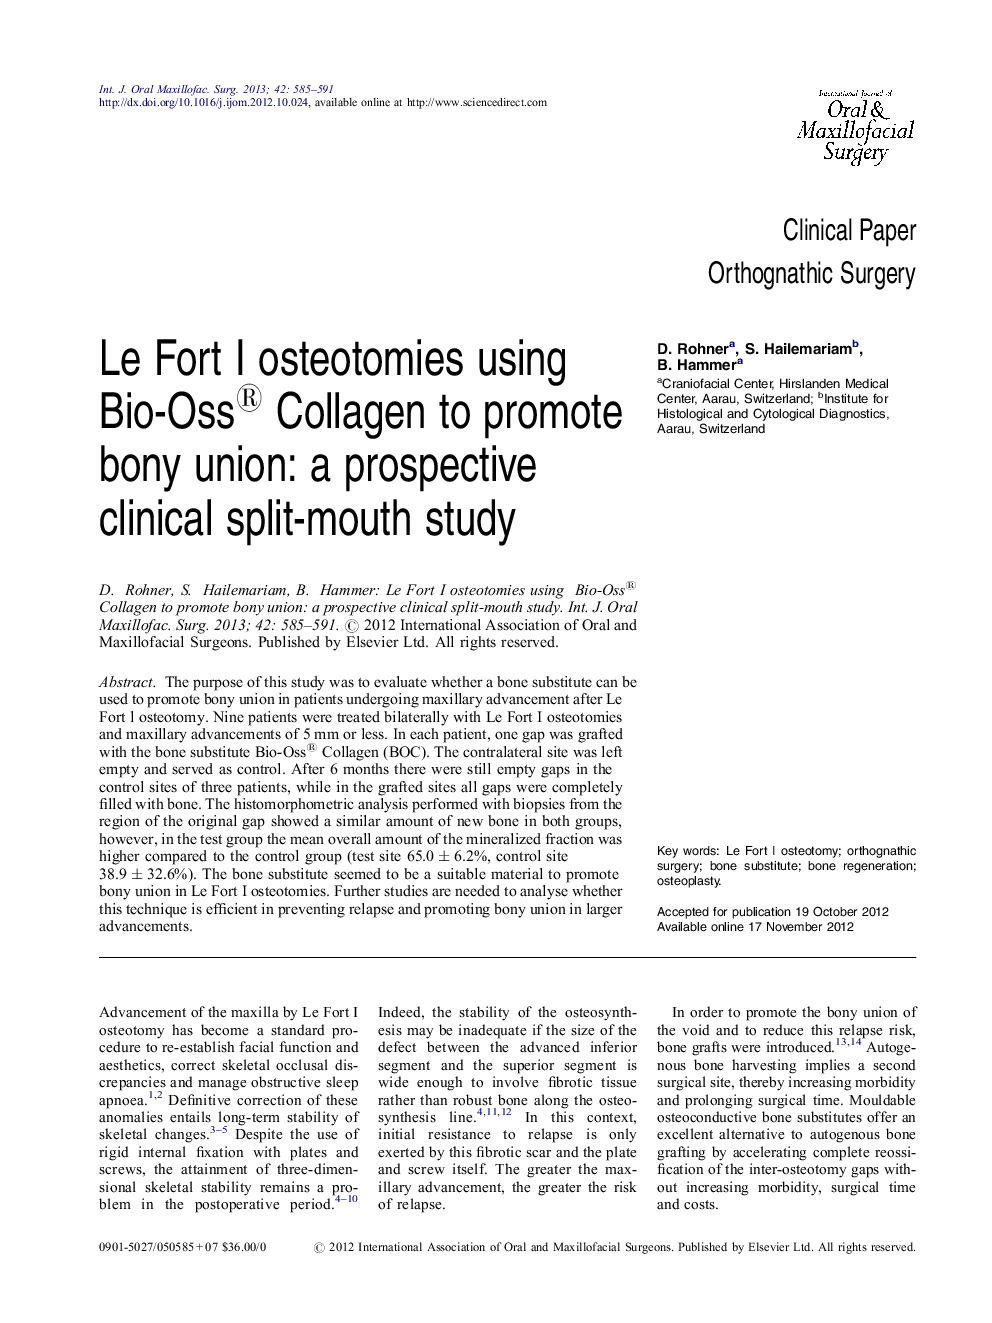 Le Fort I osteotomies using Bio-Oss® Collagen to promote bony union: a prospective clinical split-mouth study